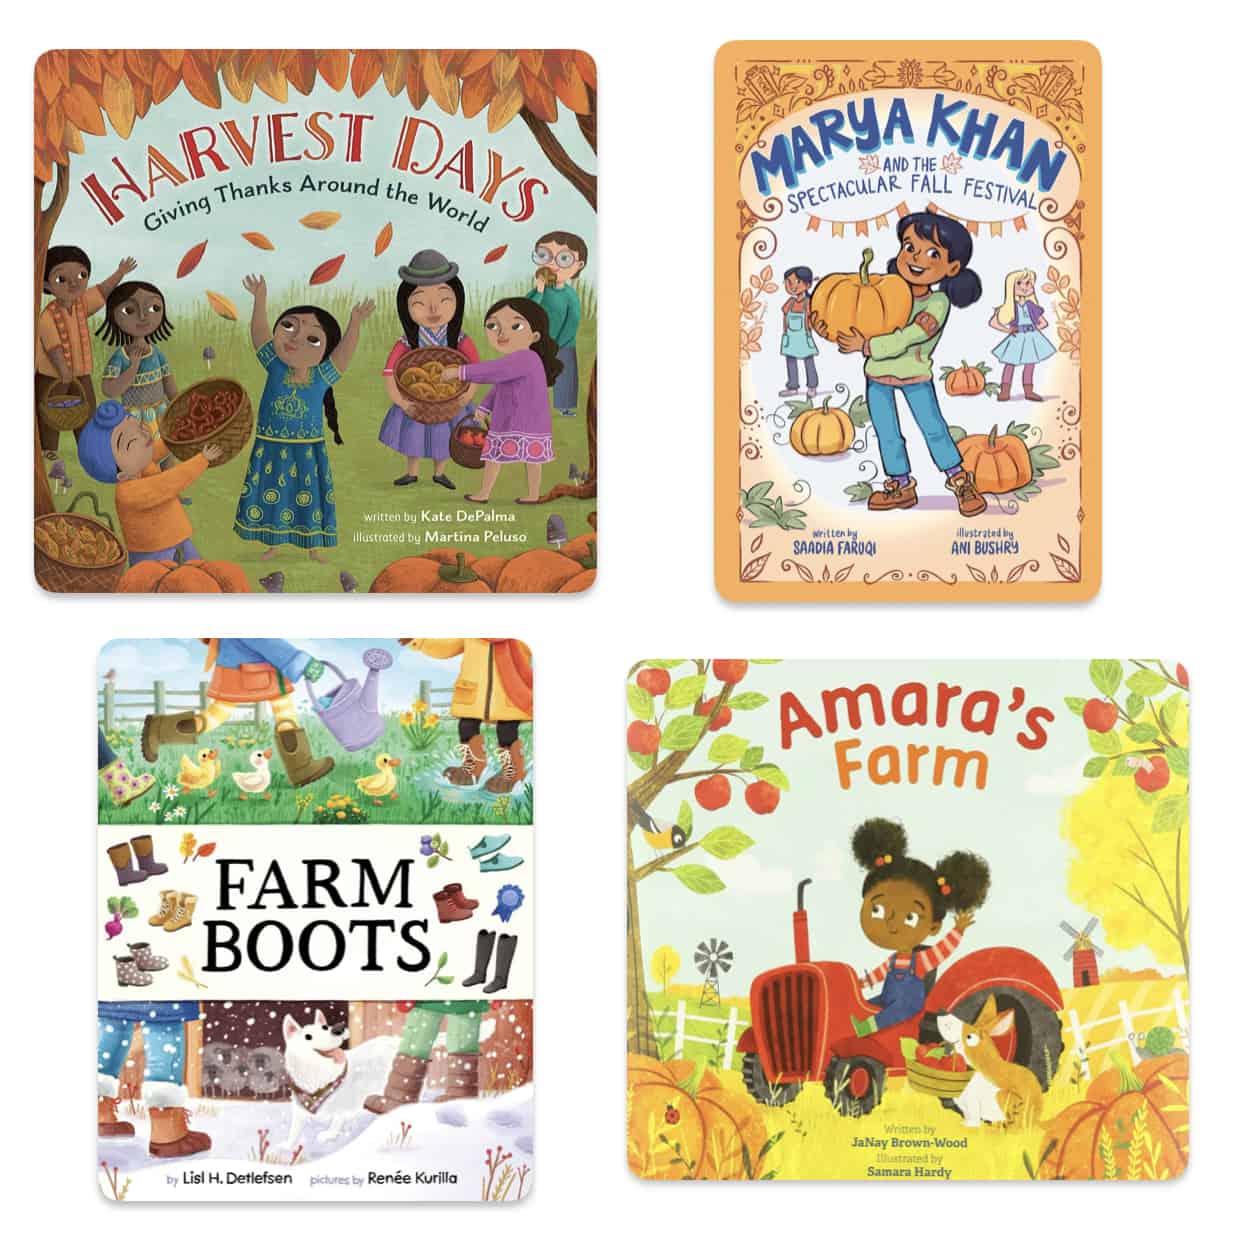 4 books about farms and harvest in fall